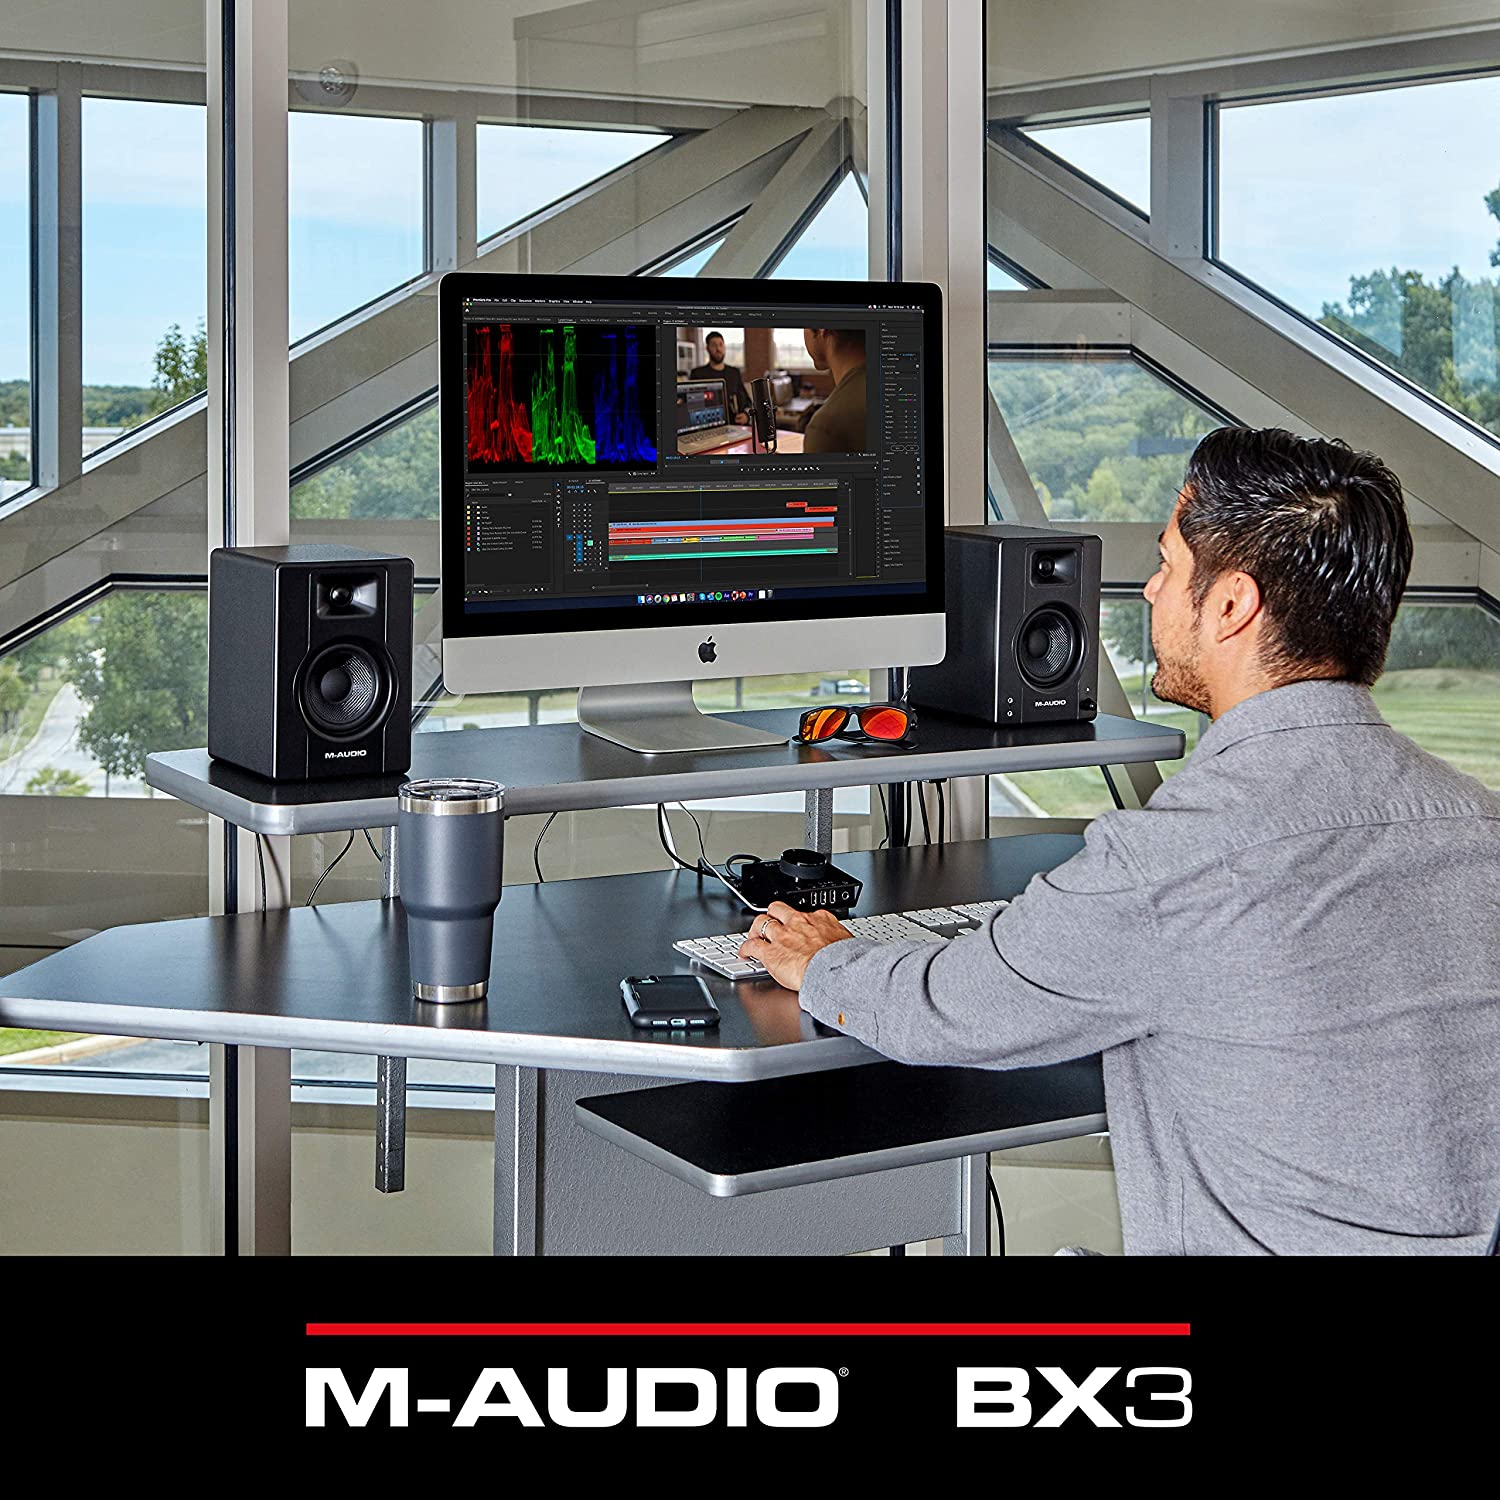 M-Audio BX3 - 120-Watt Powered Studio Monitors / Desktop Computer Speakers for Music Production, Gaming, Live Streaming, and Podcasting (Pair) - Golchha Computers